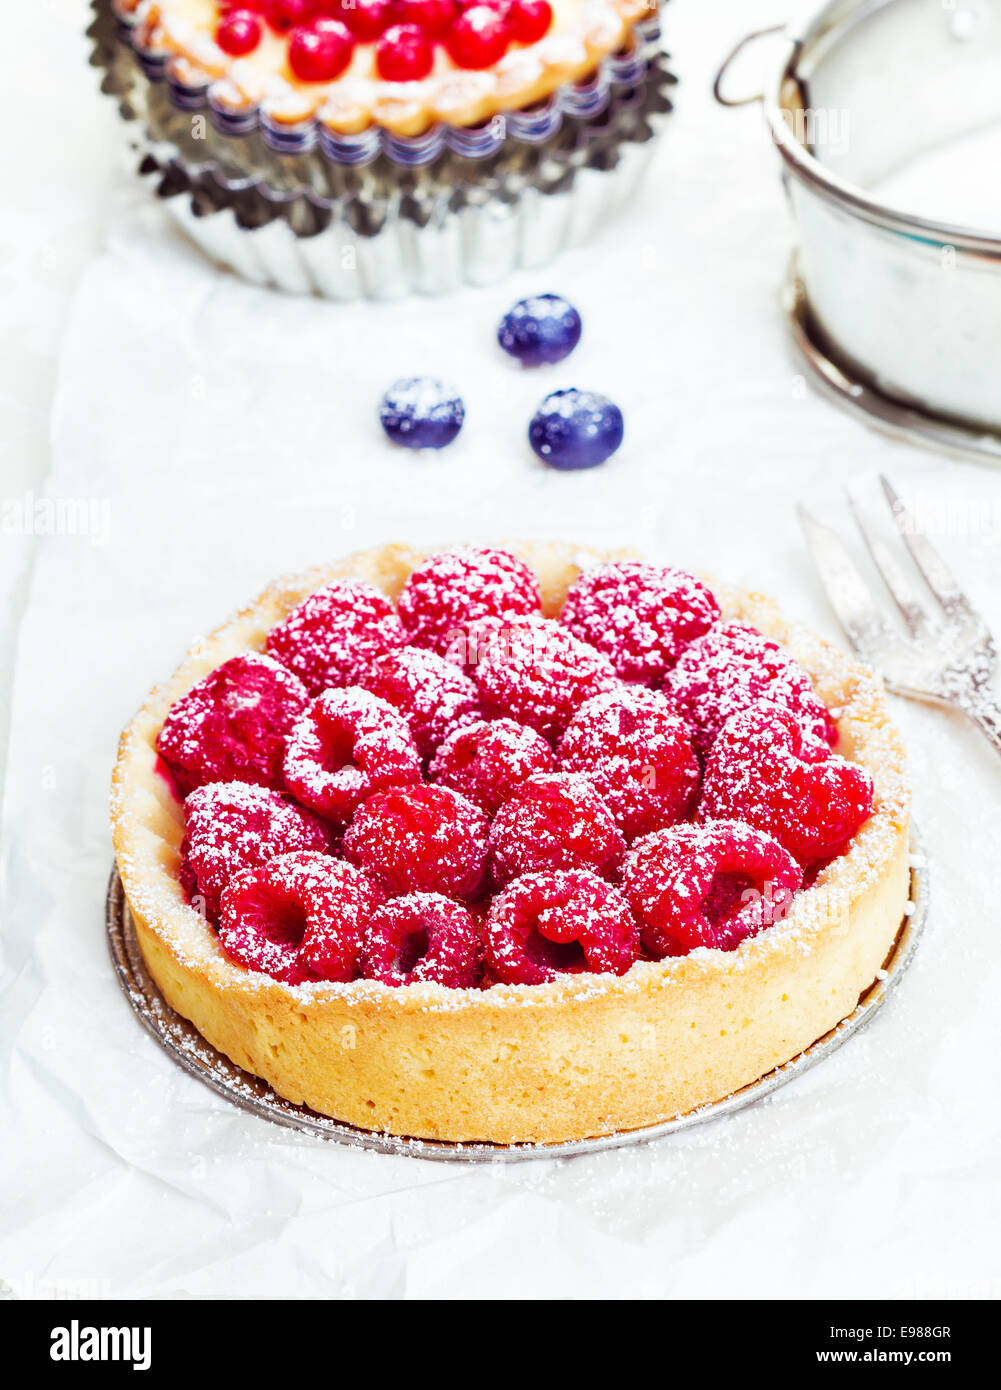 Small individual serving of a fresh whole raspberry tart dusted with sugar on a golden crisp crust with a silver cake fork Stock Photo